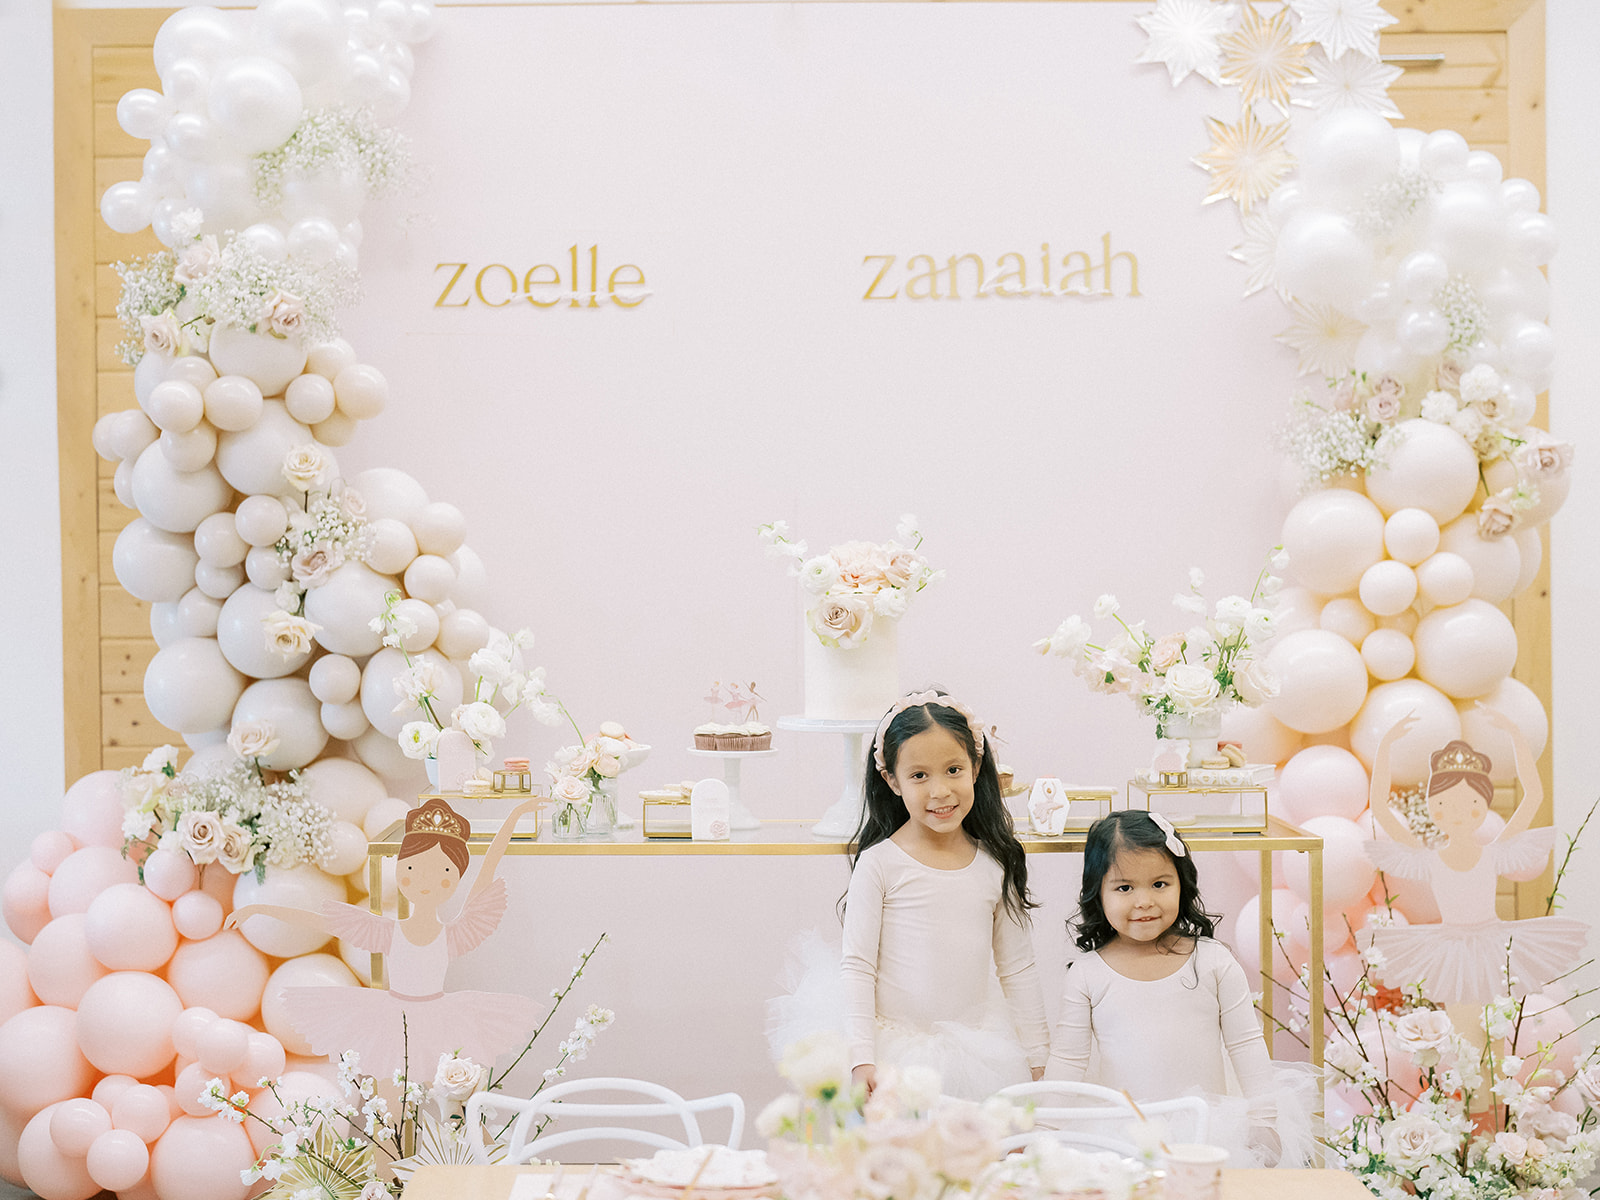 Ballerina birthday girls in front of their themed backdrop.